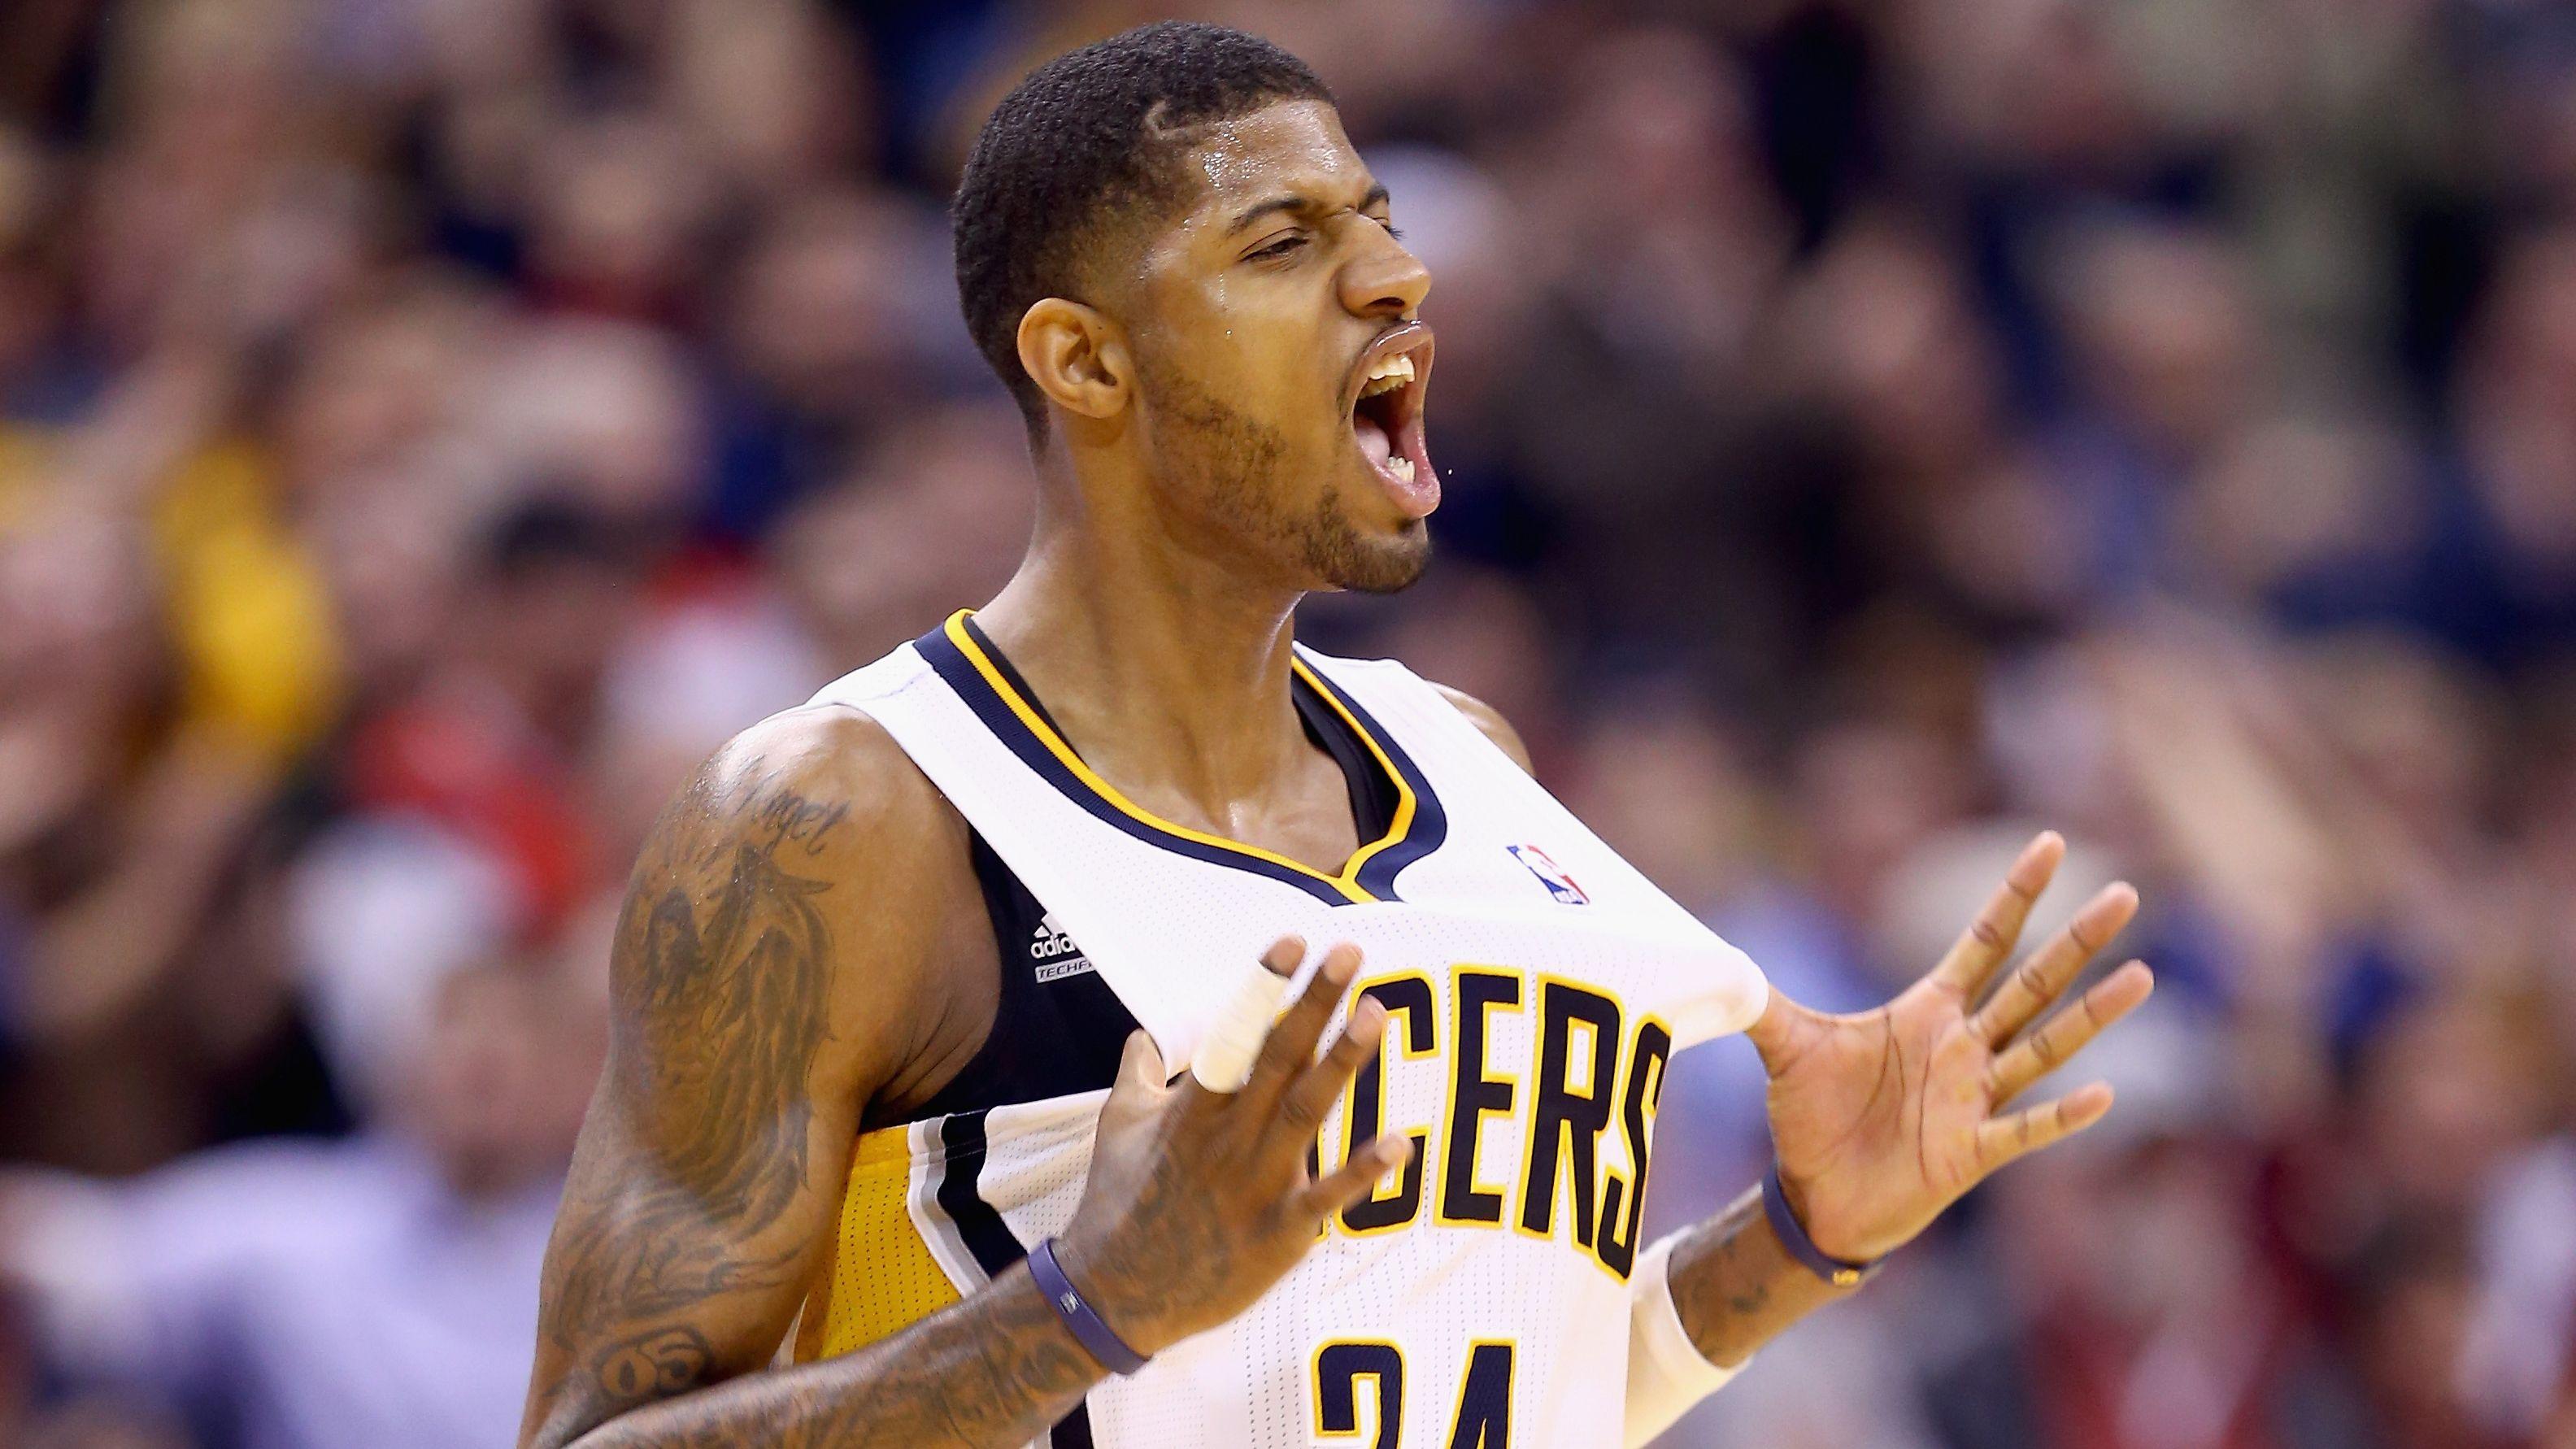 Awesome Paul George pictures